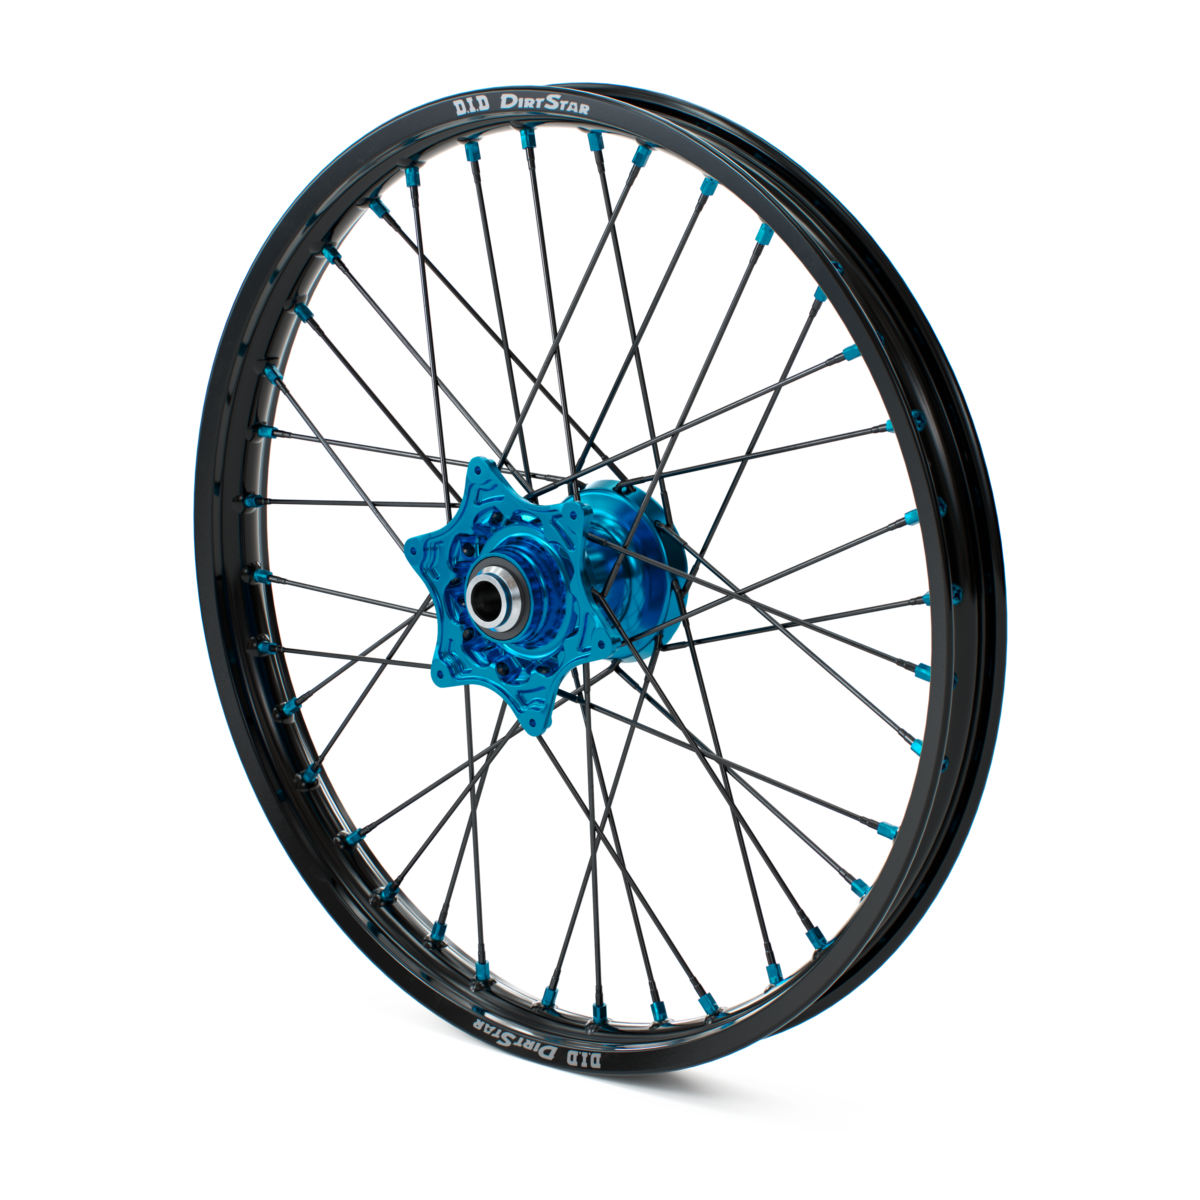 Factory Front Wheel 1.6x21